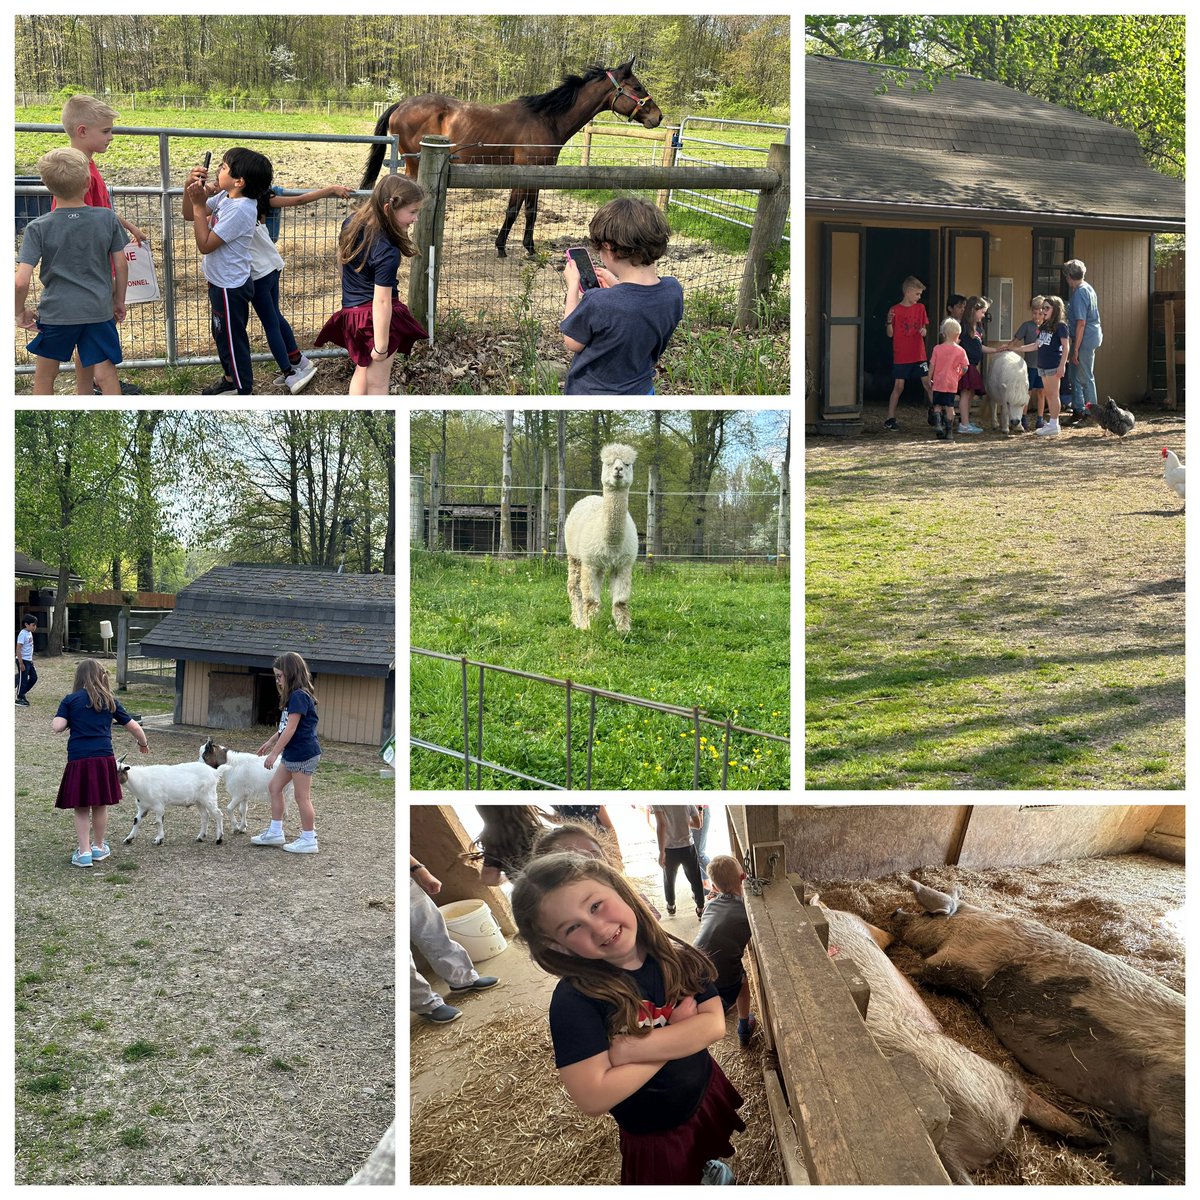 My amazing 1st graders made and sold $650 of keychains during our economics PBL in December. Today, some of the kids and families helped me deliver our donations to Happy Trails Farm Animal Sanctuary in Ravenna! So proud 🥹